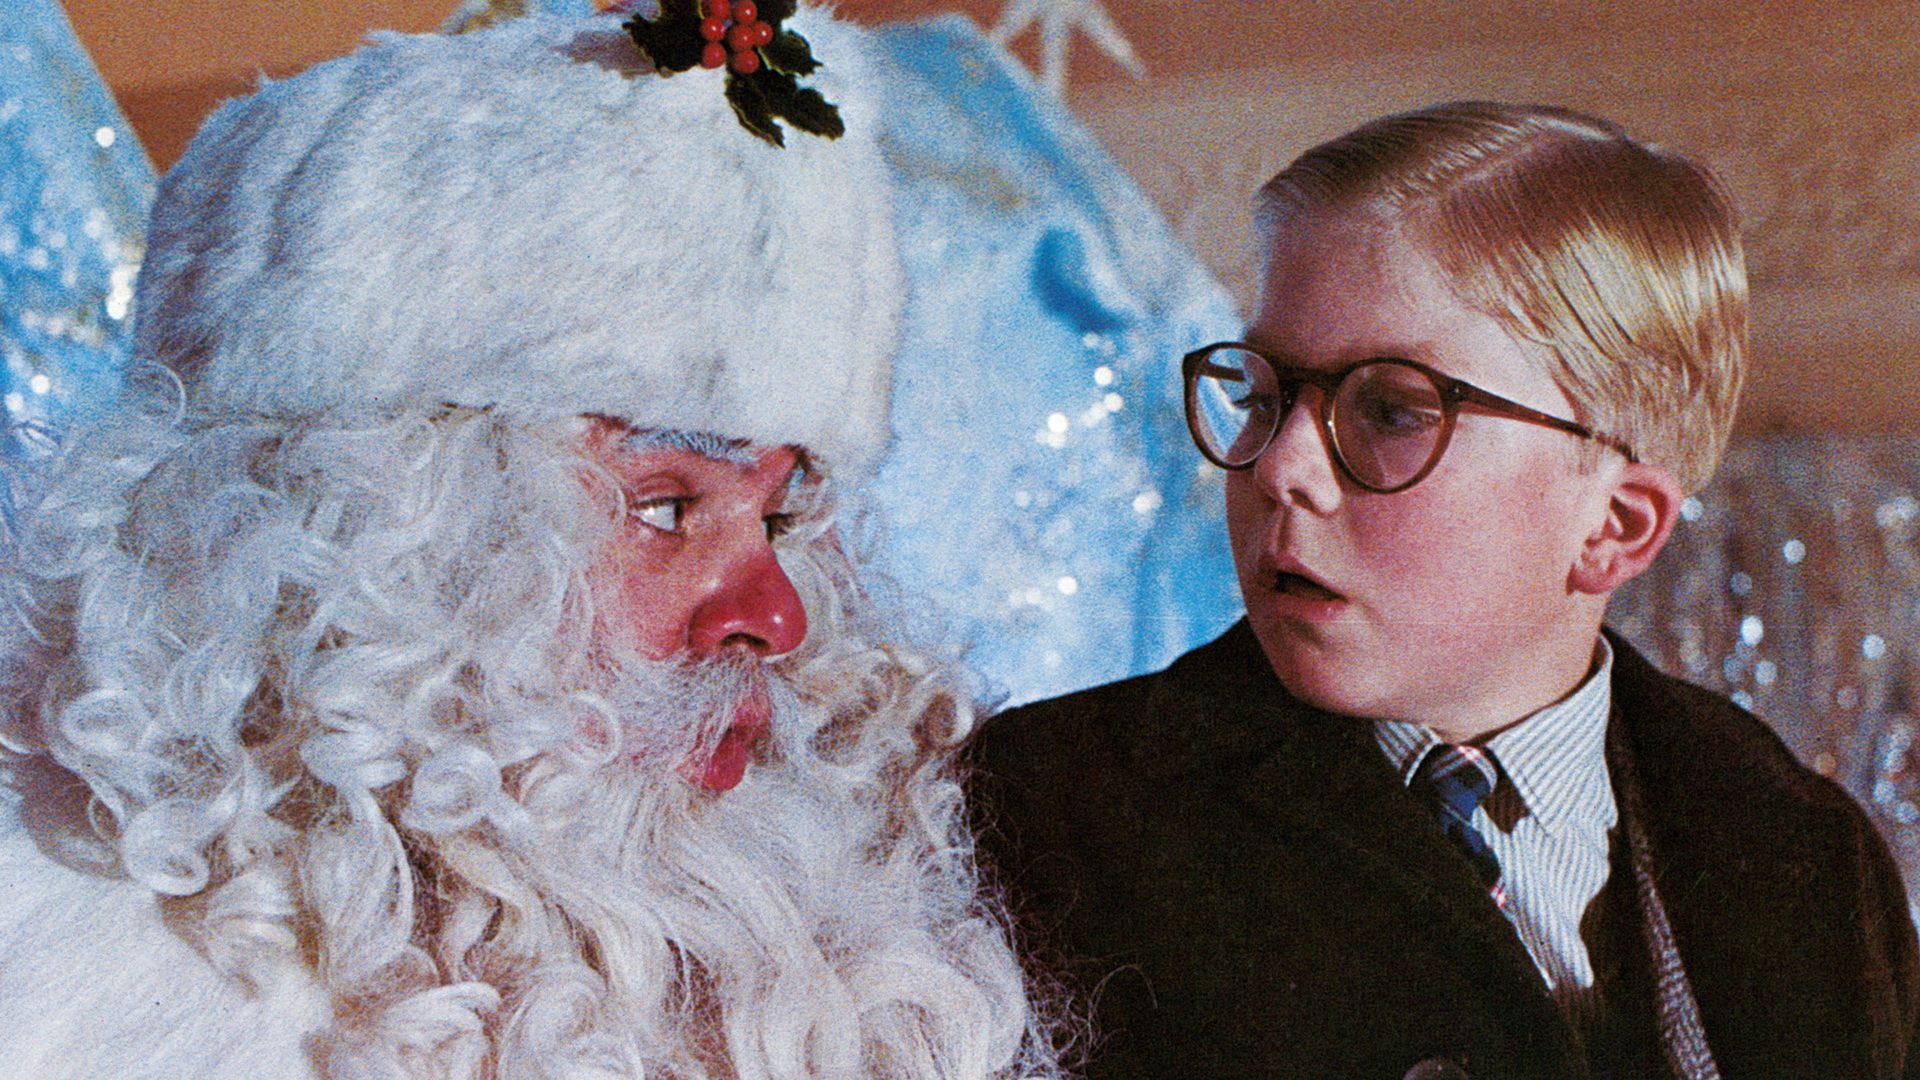 The scene from "A Christmas Story" with Ralphie sitting on Santa's lap. 